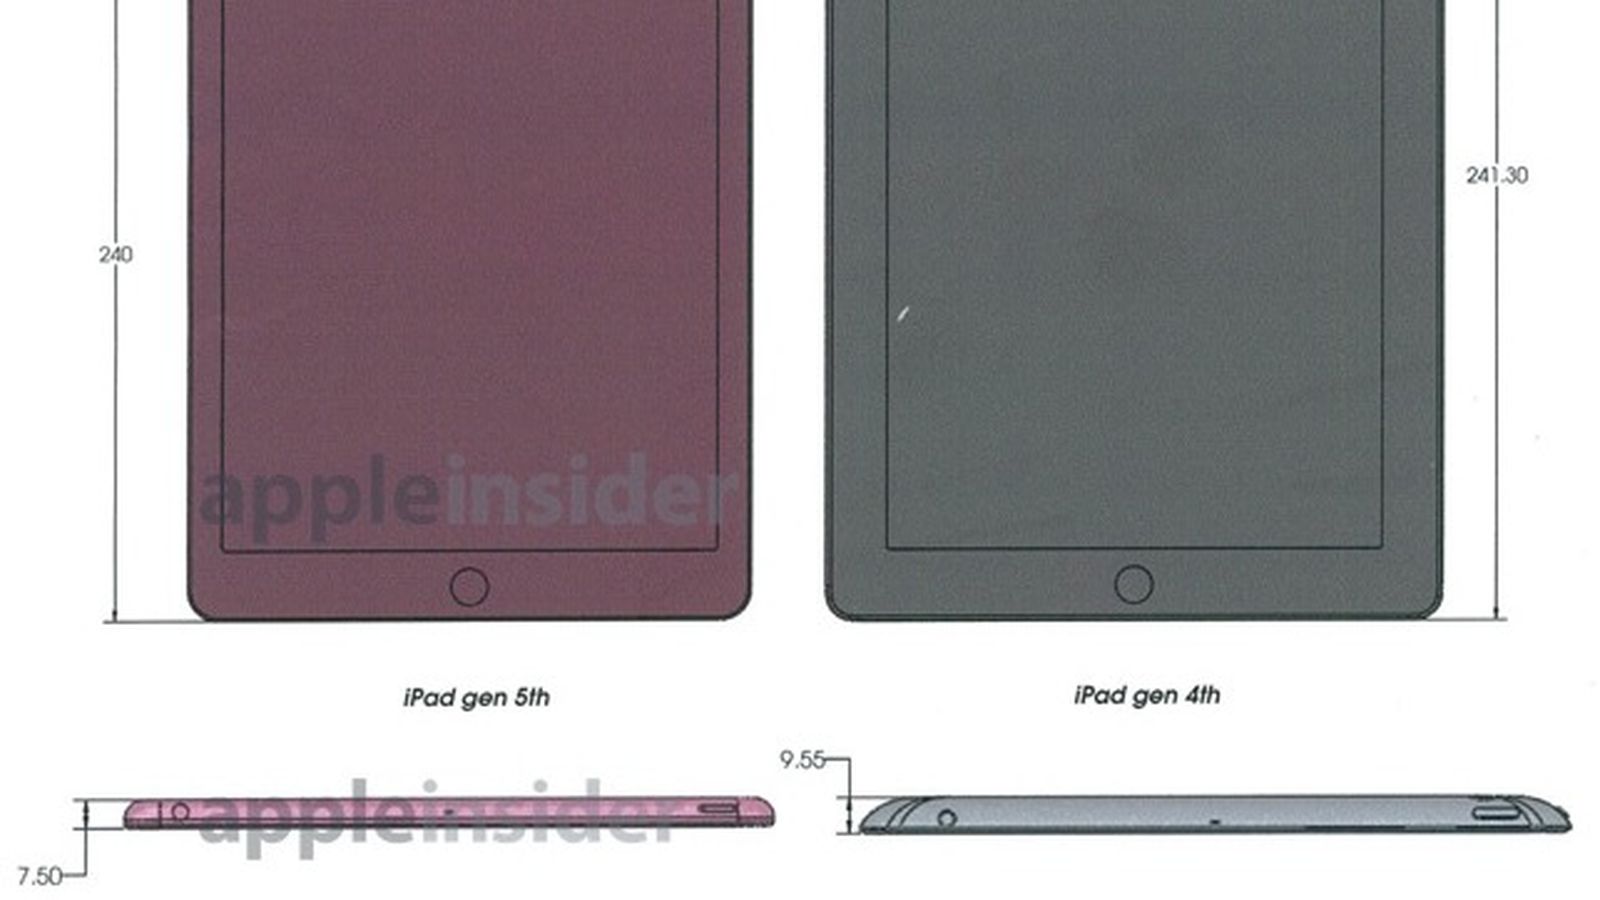 iPad Air 2 - Technical Specification